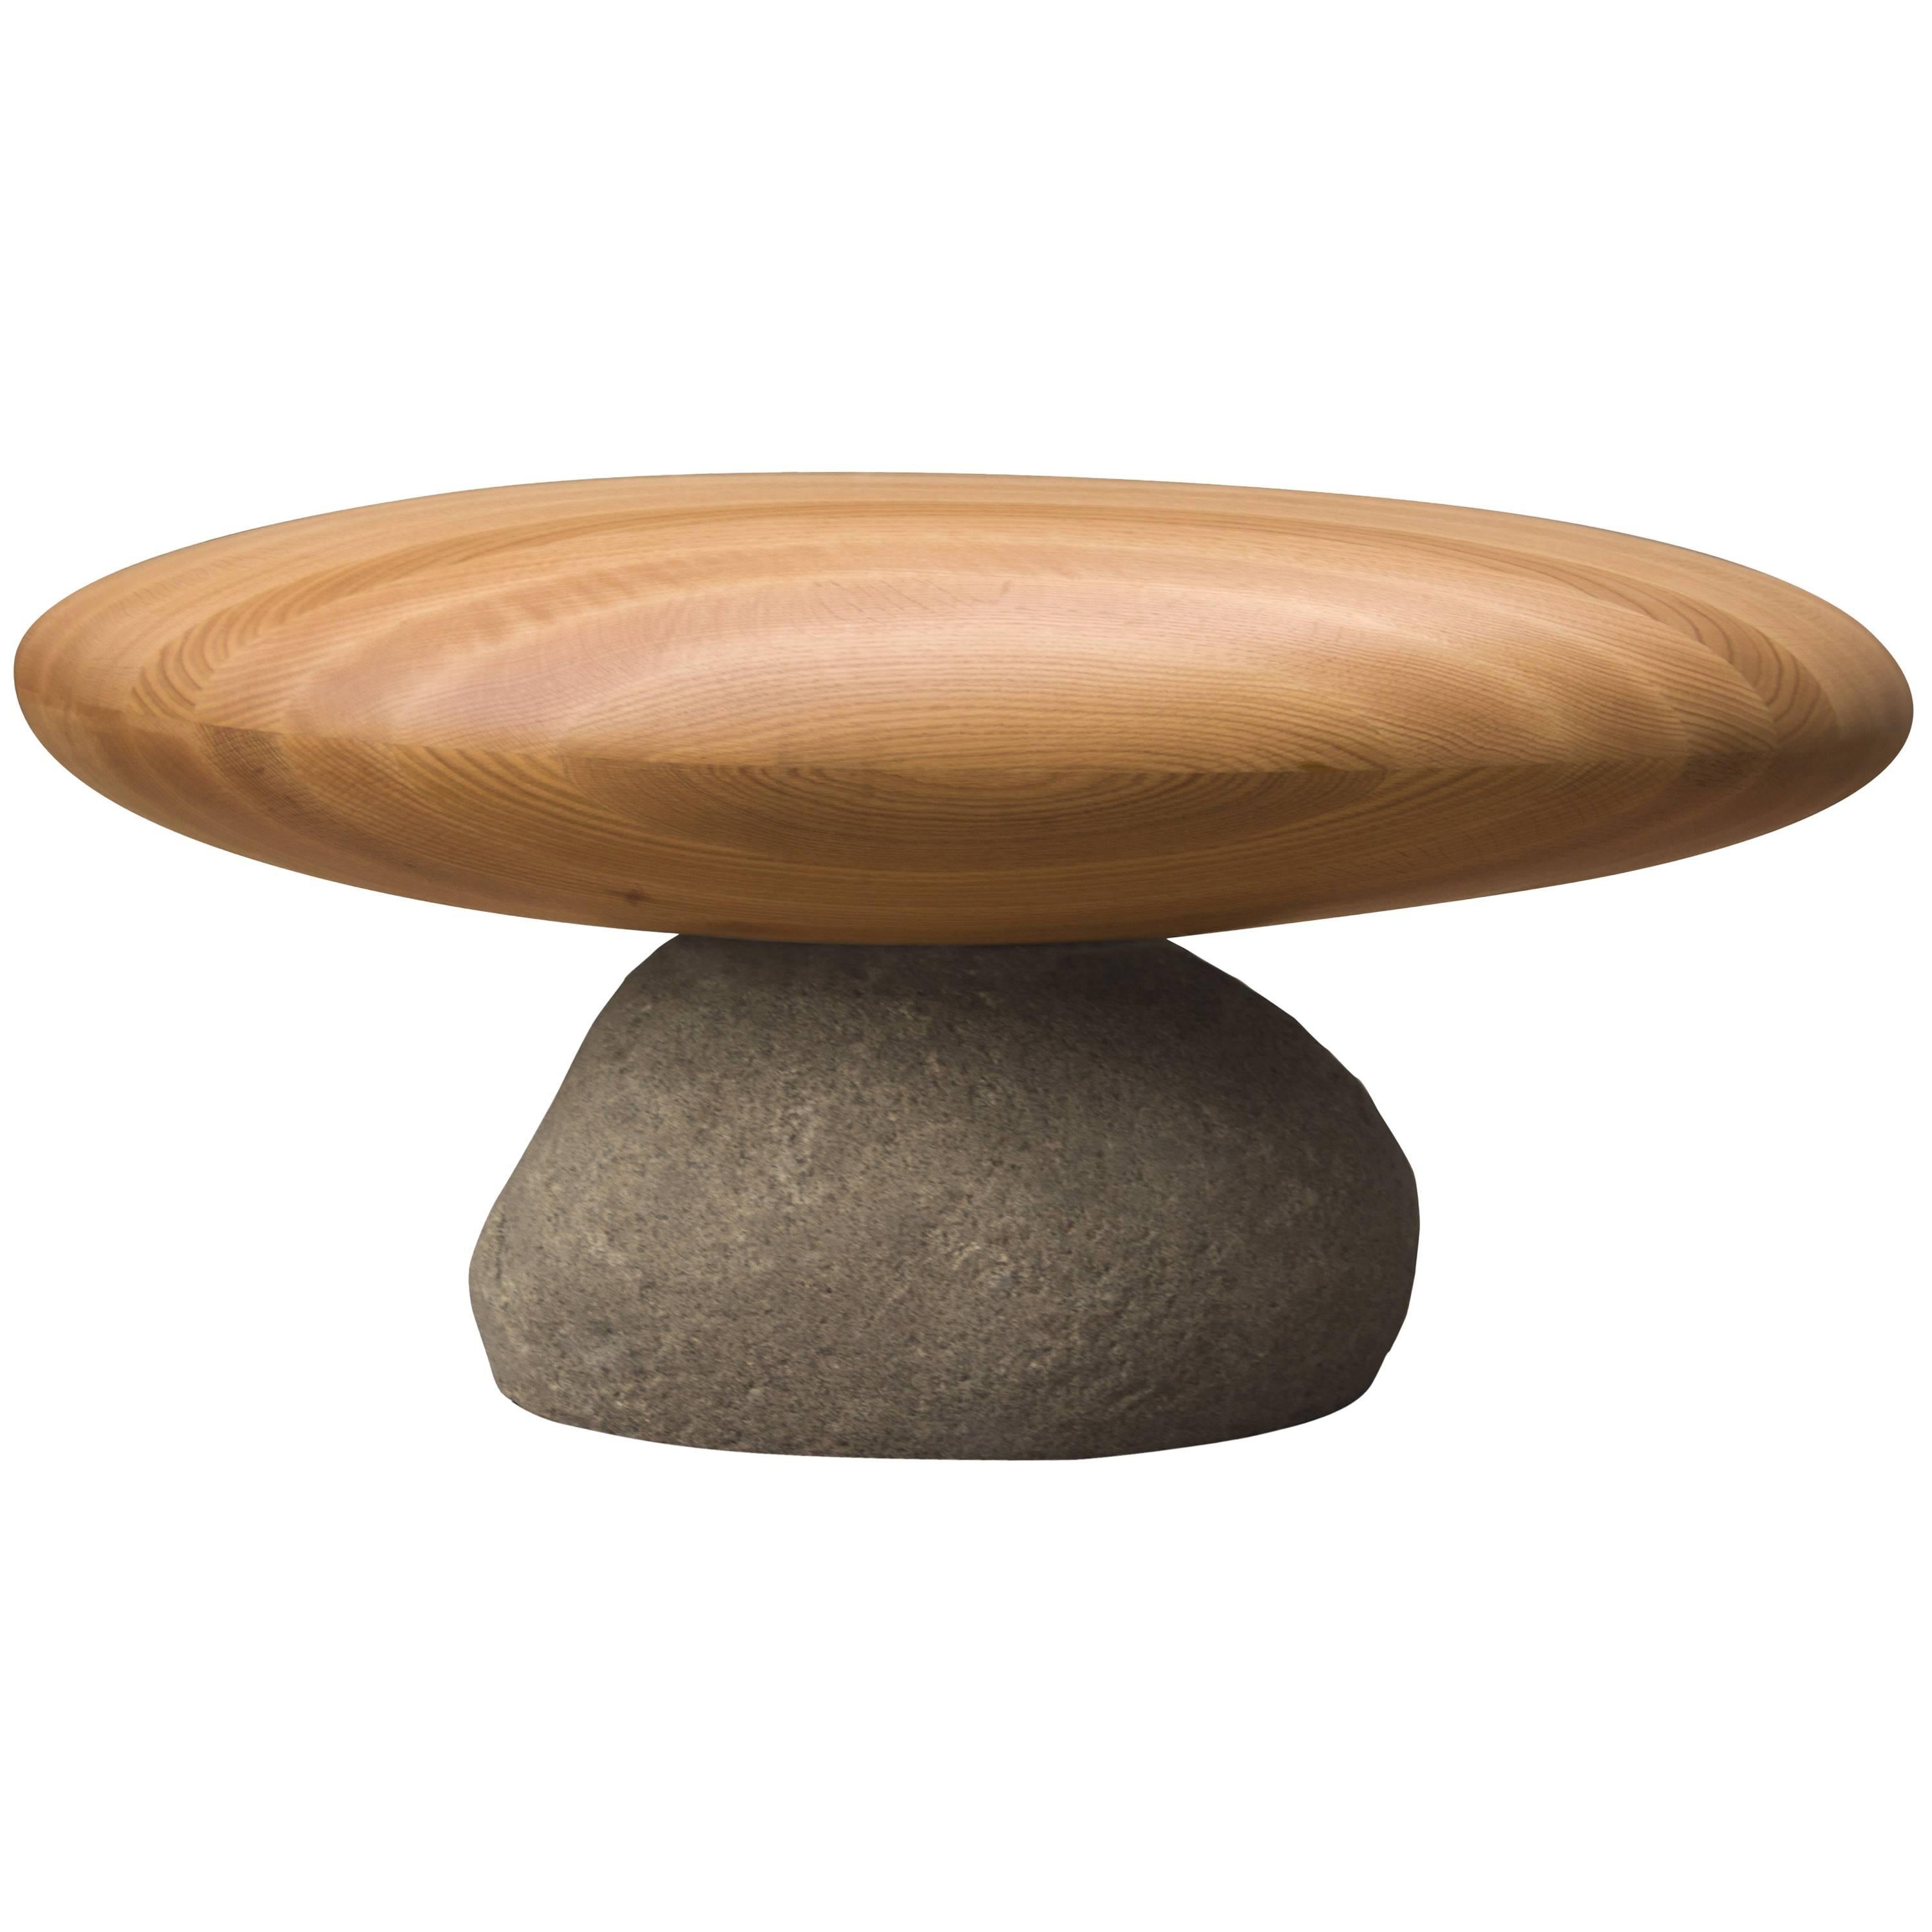 Byung-Hoon Choi, Stool, Red Oak, Wood, Natural Stone, Earth Tones, 2015